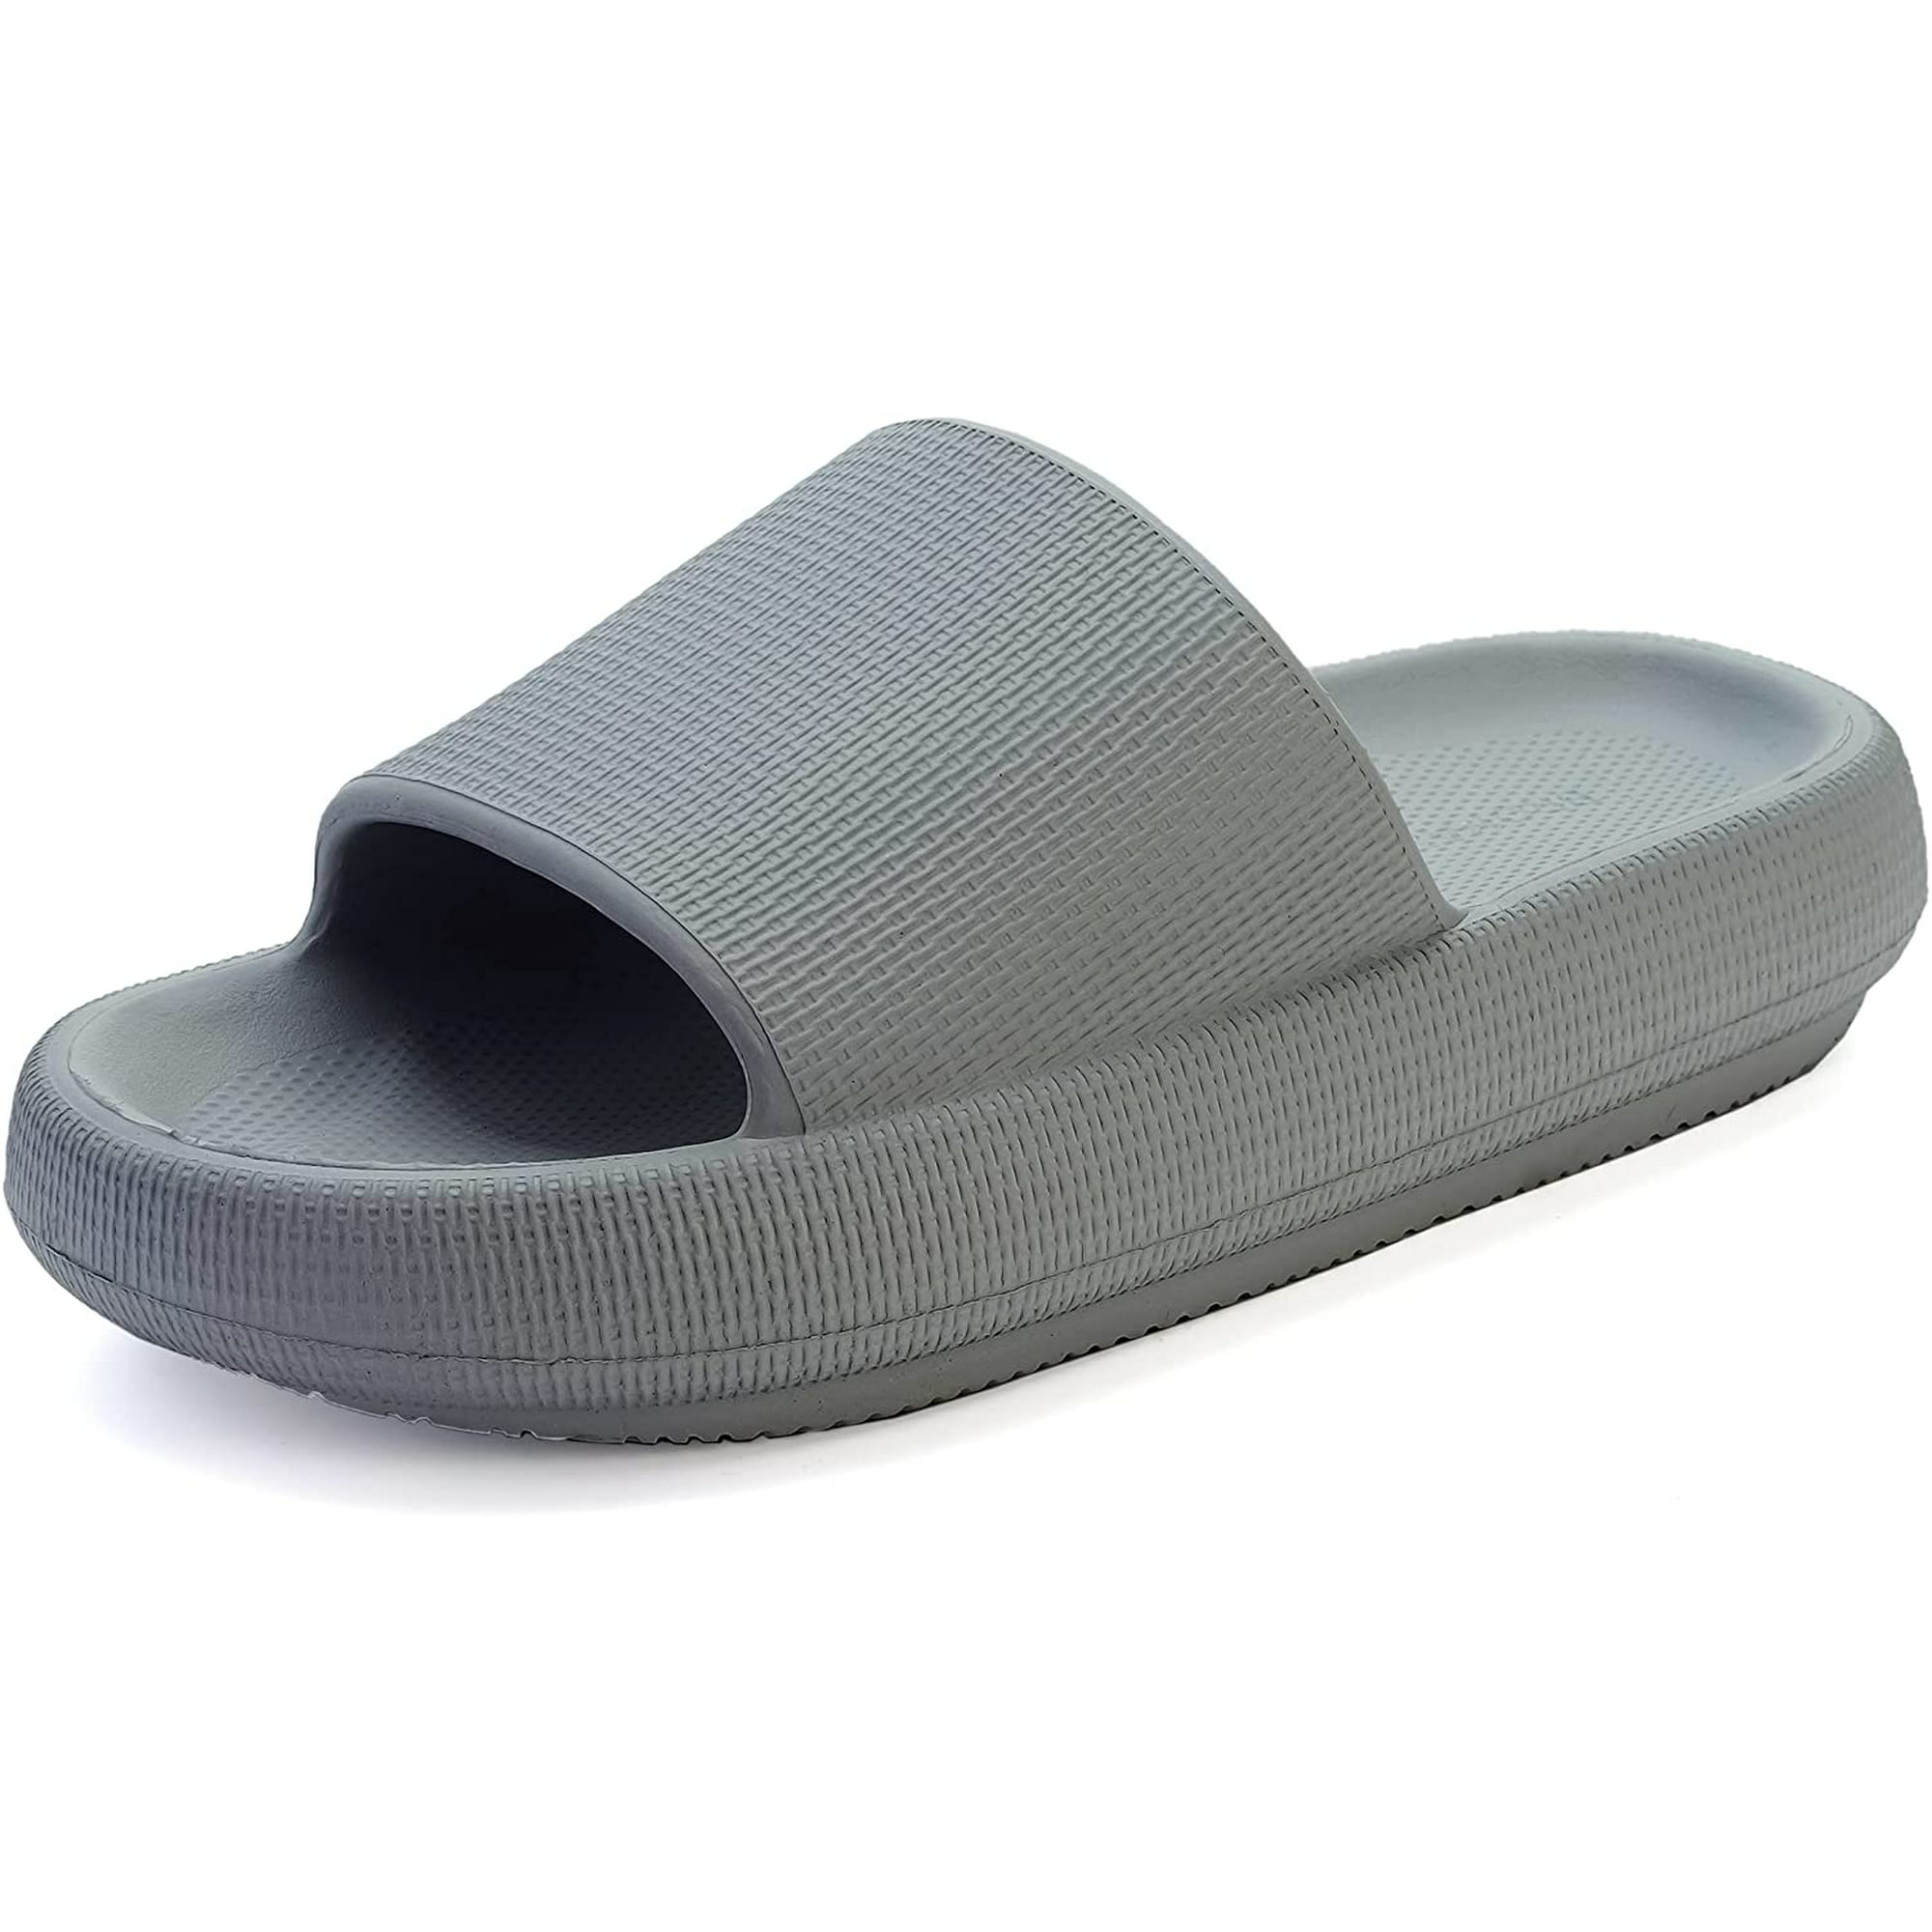 Pillow Slides for Women and Men | The Official Ergonomic Slippers | Plantar Fasciitis | Foot Pain Relief | Comfy and Versatile | Lightweight